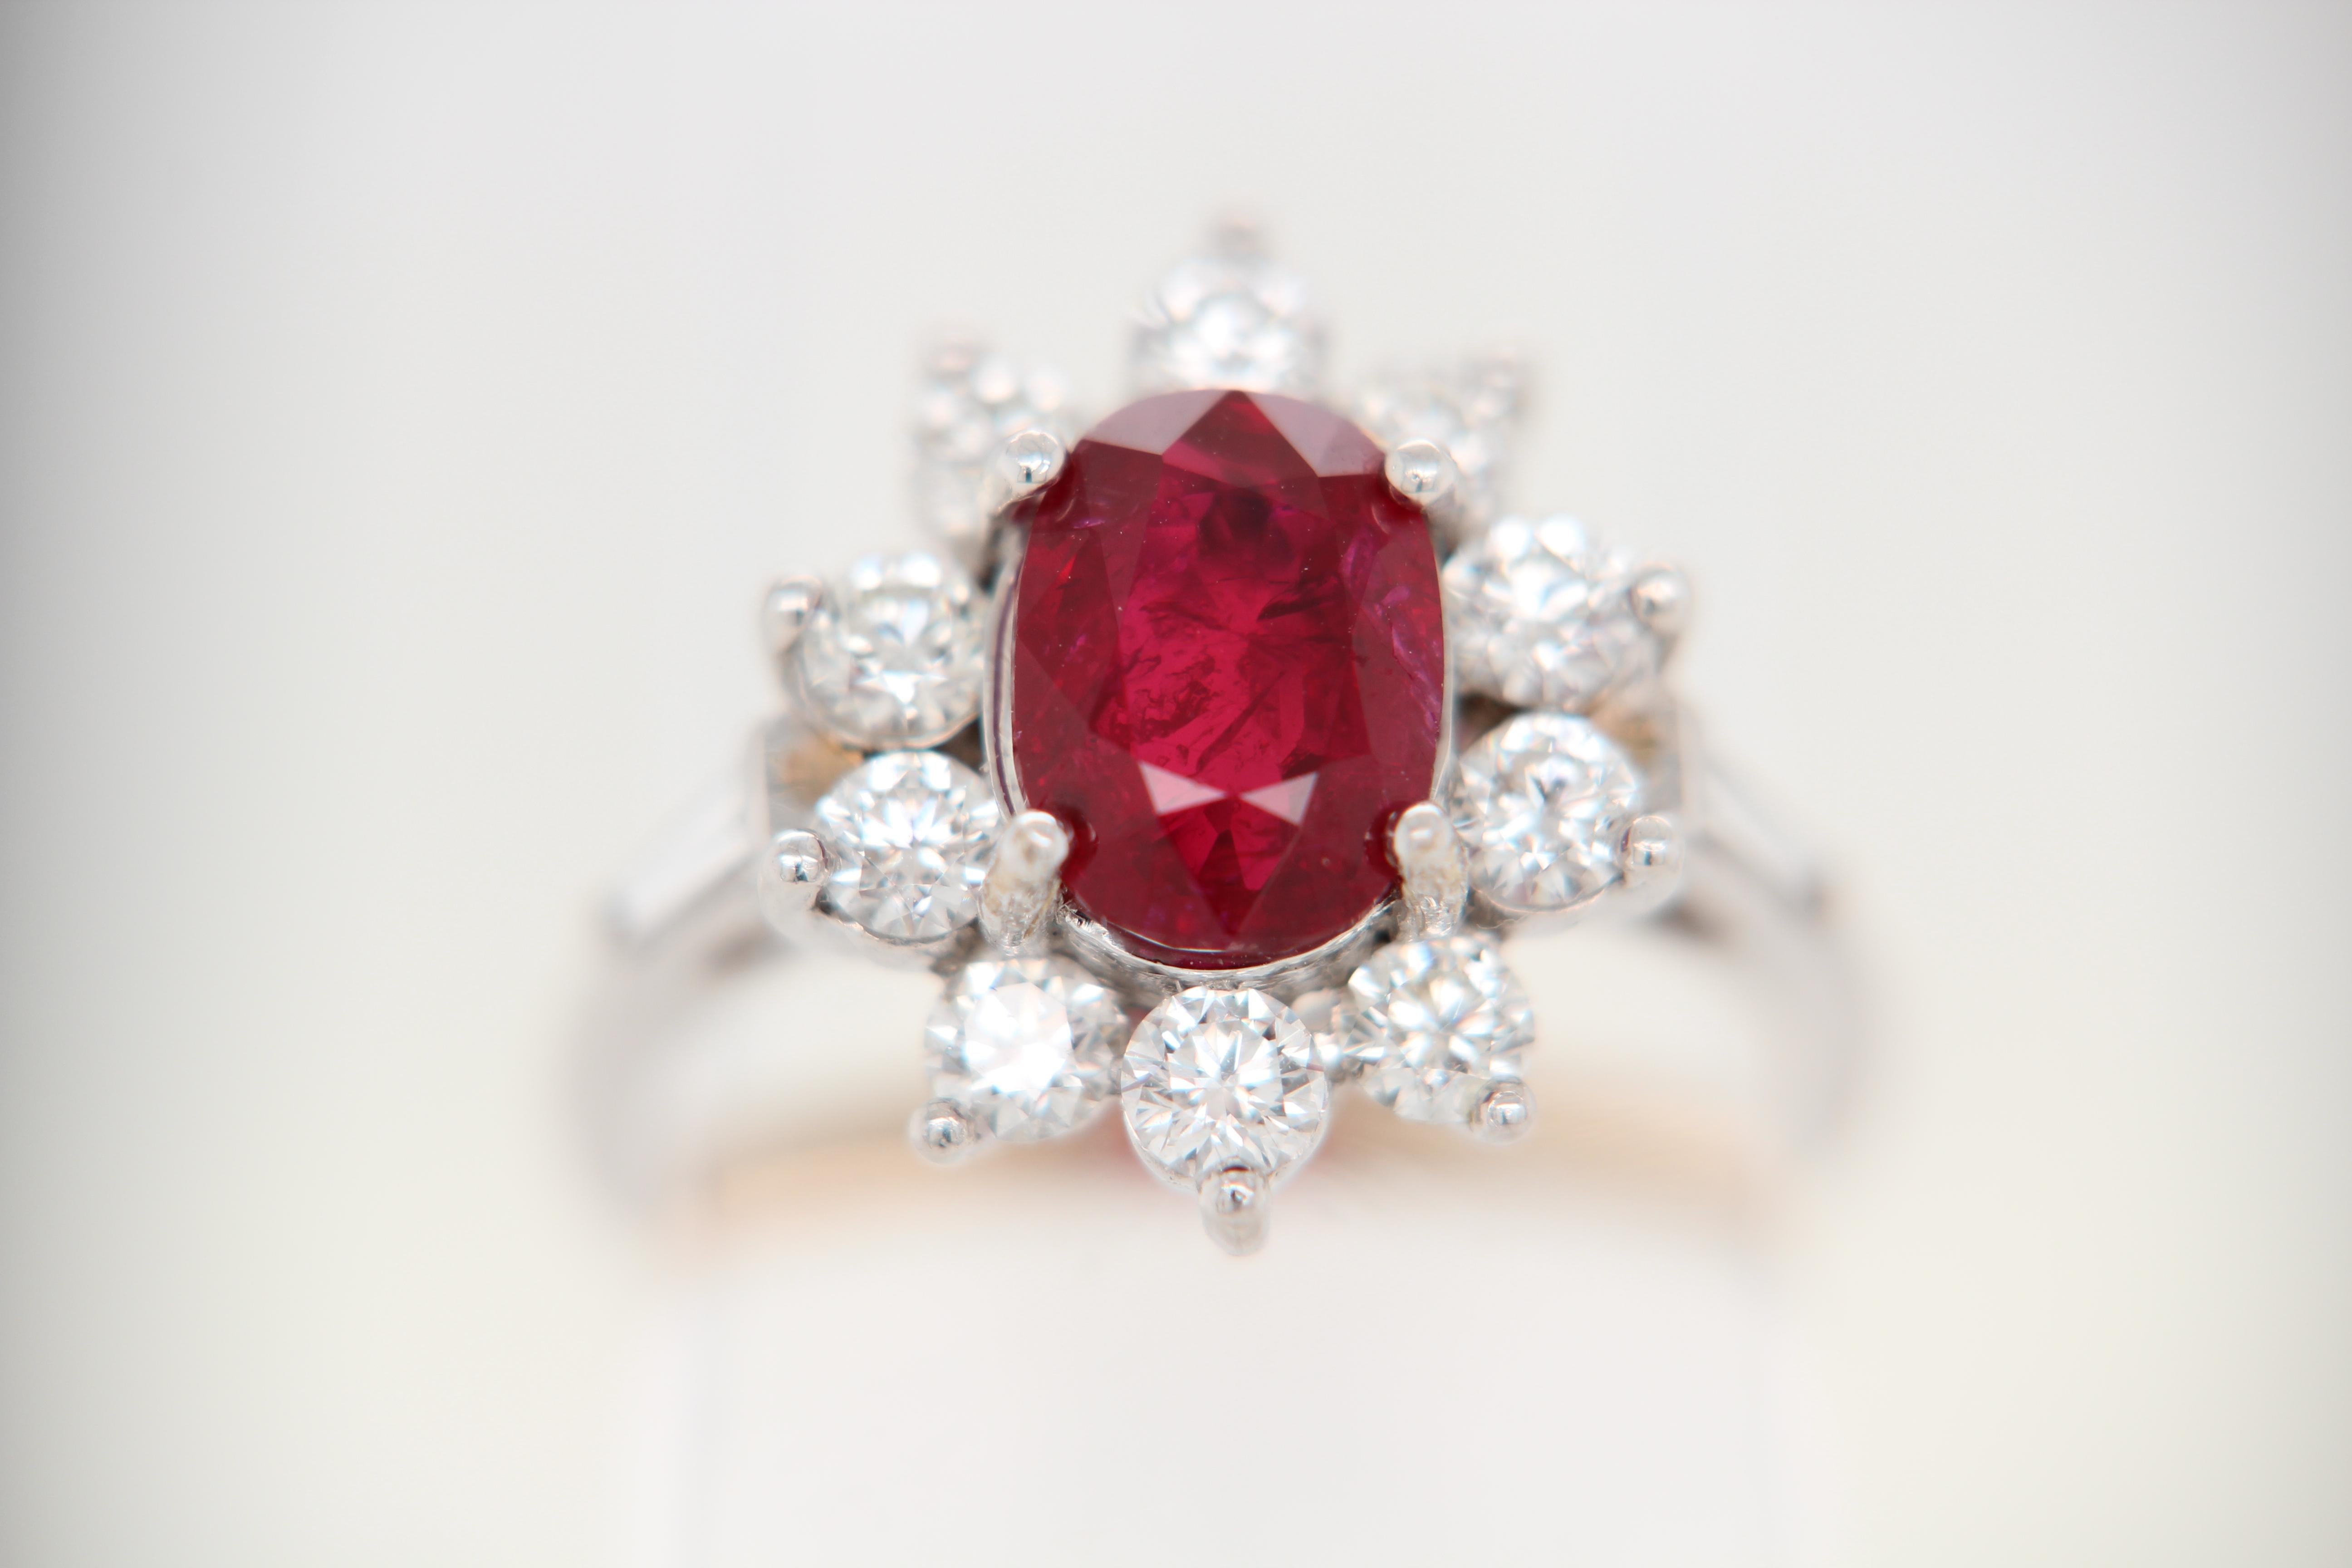 A Ruby and diamond ring. The ring's center stone is 2.02 carat pigeon blood Burmese ruby certified by GRS. The center stone is surrounded by 1.07 carat mix shaped diamonds. The ring can be resized.